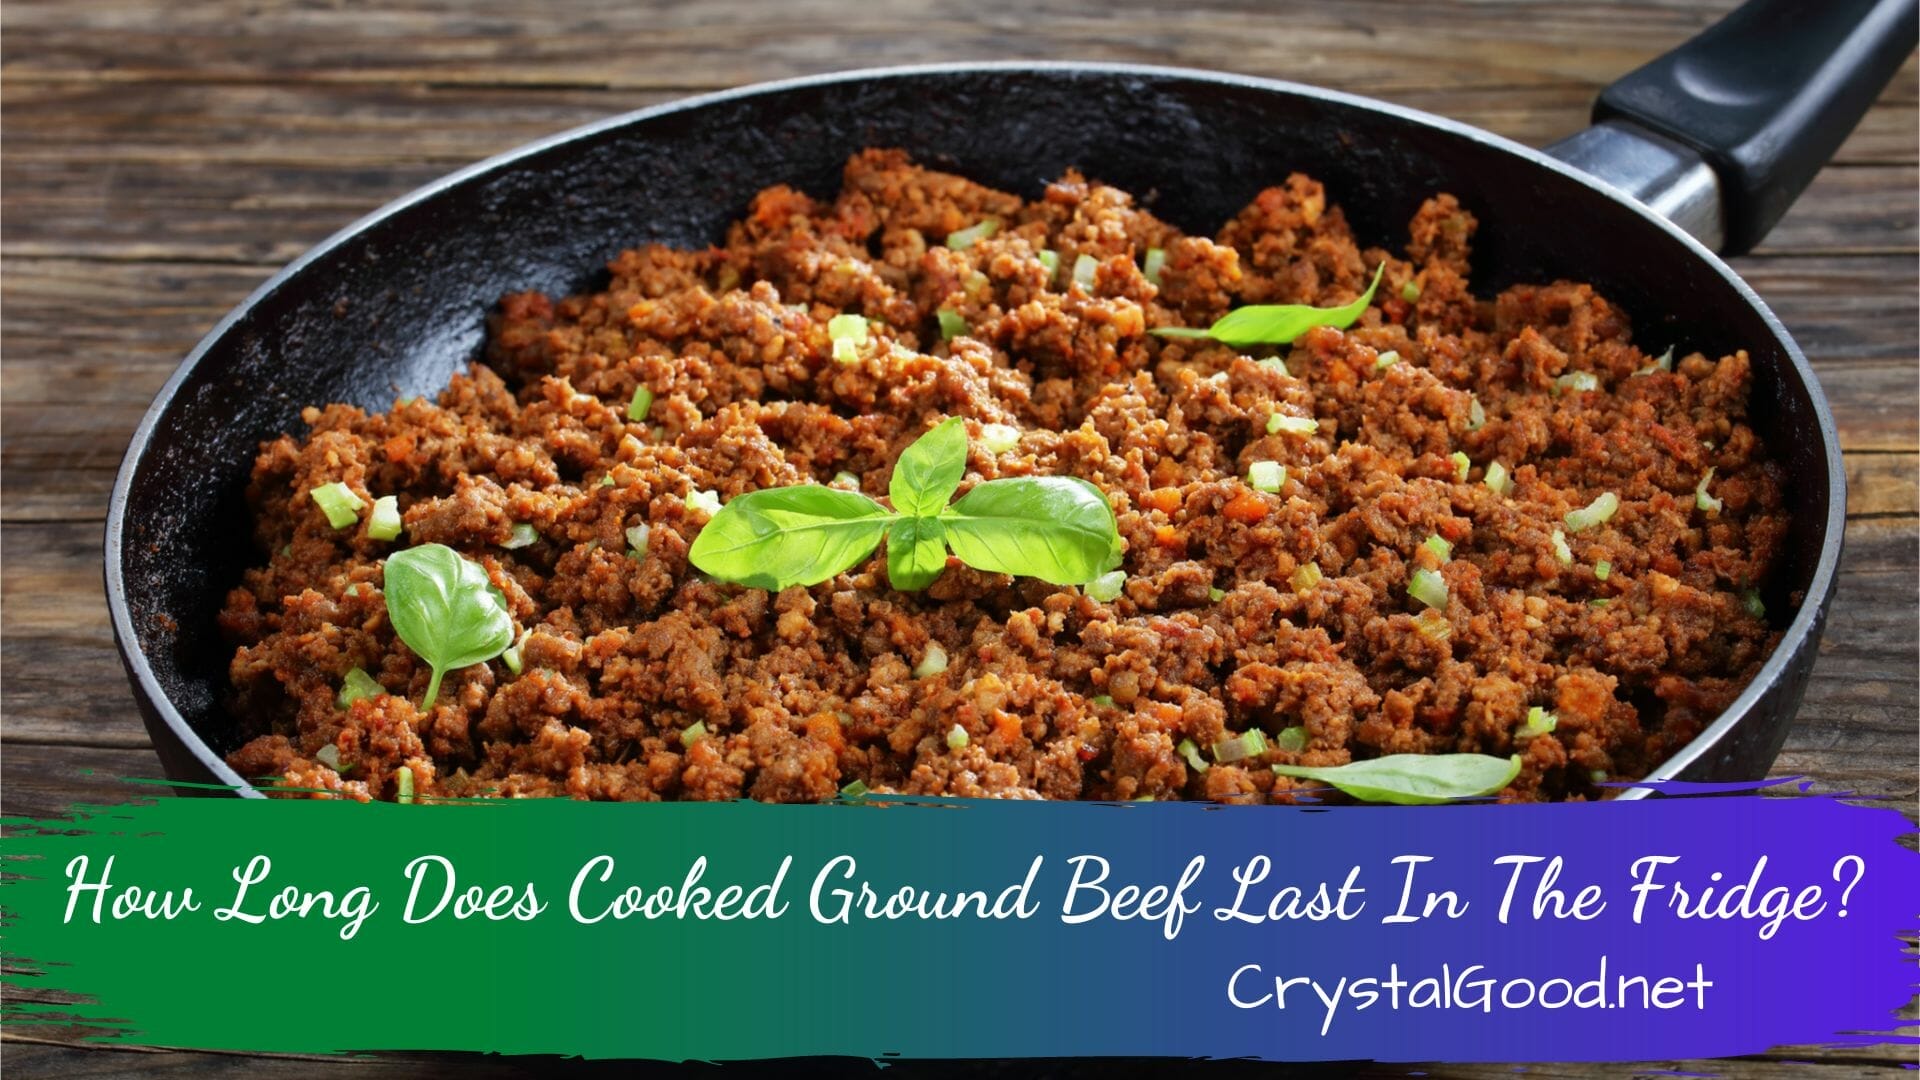 how long does cooked ground beef last in the fridge 7. Proper Storage Containers